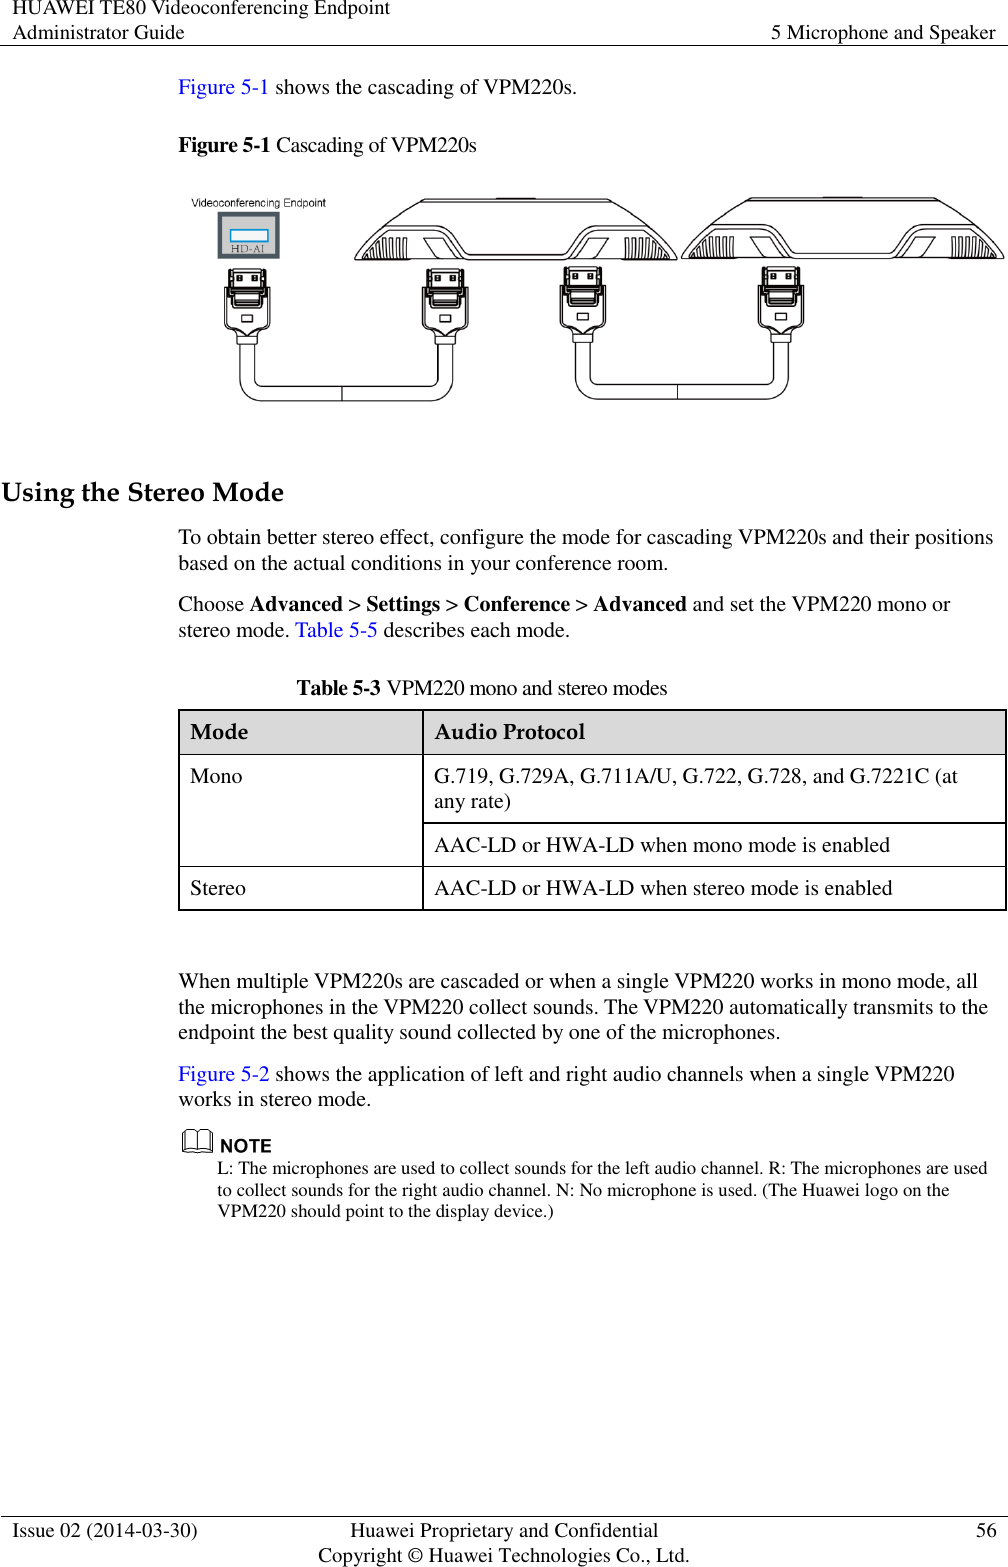 HUAWEI TE80 Videoconferencing Endpoint Administrator Guide 5 Microphone and Speaker  Issue 02 (2014-03-30) Huawei Proprietary and Confidential Copyright © Huawei Technologies Co., Ltd. 56  Figure 5-1 shows the cascading of VPM220s. Figure 5-1 Cascading of VPM220s   Using the Stereo Mode To obtain better stereo effect, configure the mode for cascading VPM220s and their positions based on the actual conditions in your conference room. Choose Advanced &gt; Settings &gt; Conference &gt; Advanced and set the VPM220 mono or stereo mode. Table 5-5 describes each mode. Table 5-3 VPM220 mono and stereo modes Mode Audio Protocol Mono G.719, G.729A, G.711A/U, G.722, G.728, and G.7221C (at any rate) AAC-LD or HWA-LD when mono mode is enabled Stereo AAC-LD or HWA-LD when stereo mode is enabled  When multiple VPM220s are cascaded or when a single VPM220 works in mono mode, all the microphones in the VPM220 collect sounds. The VPM220 automatically transmits to the endpoint the best quality sound collected by one of the microphones. Figure 5-2 shows the application of left and right audio channels when a single VPM220 works in stereo mode.  L: The microphones are used to collect sounds for the left audio channel. R: The microphones are used to collect sounds for the right audio channel. N: No microphone is used. (The Huawei logo on the VPM220 should point to the display device.)   